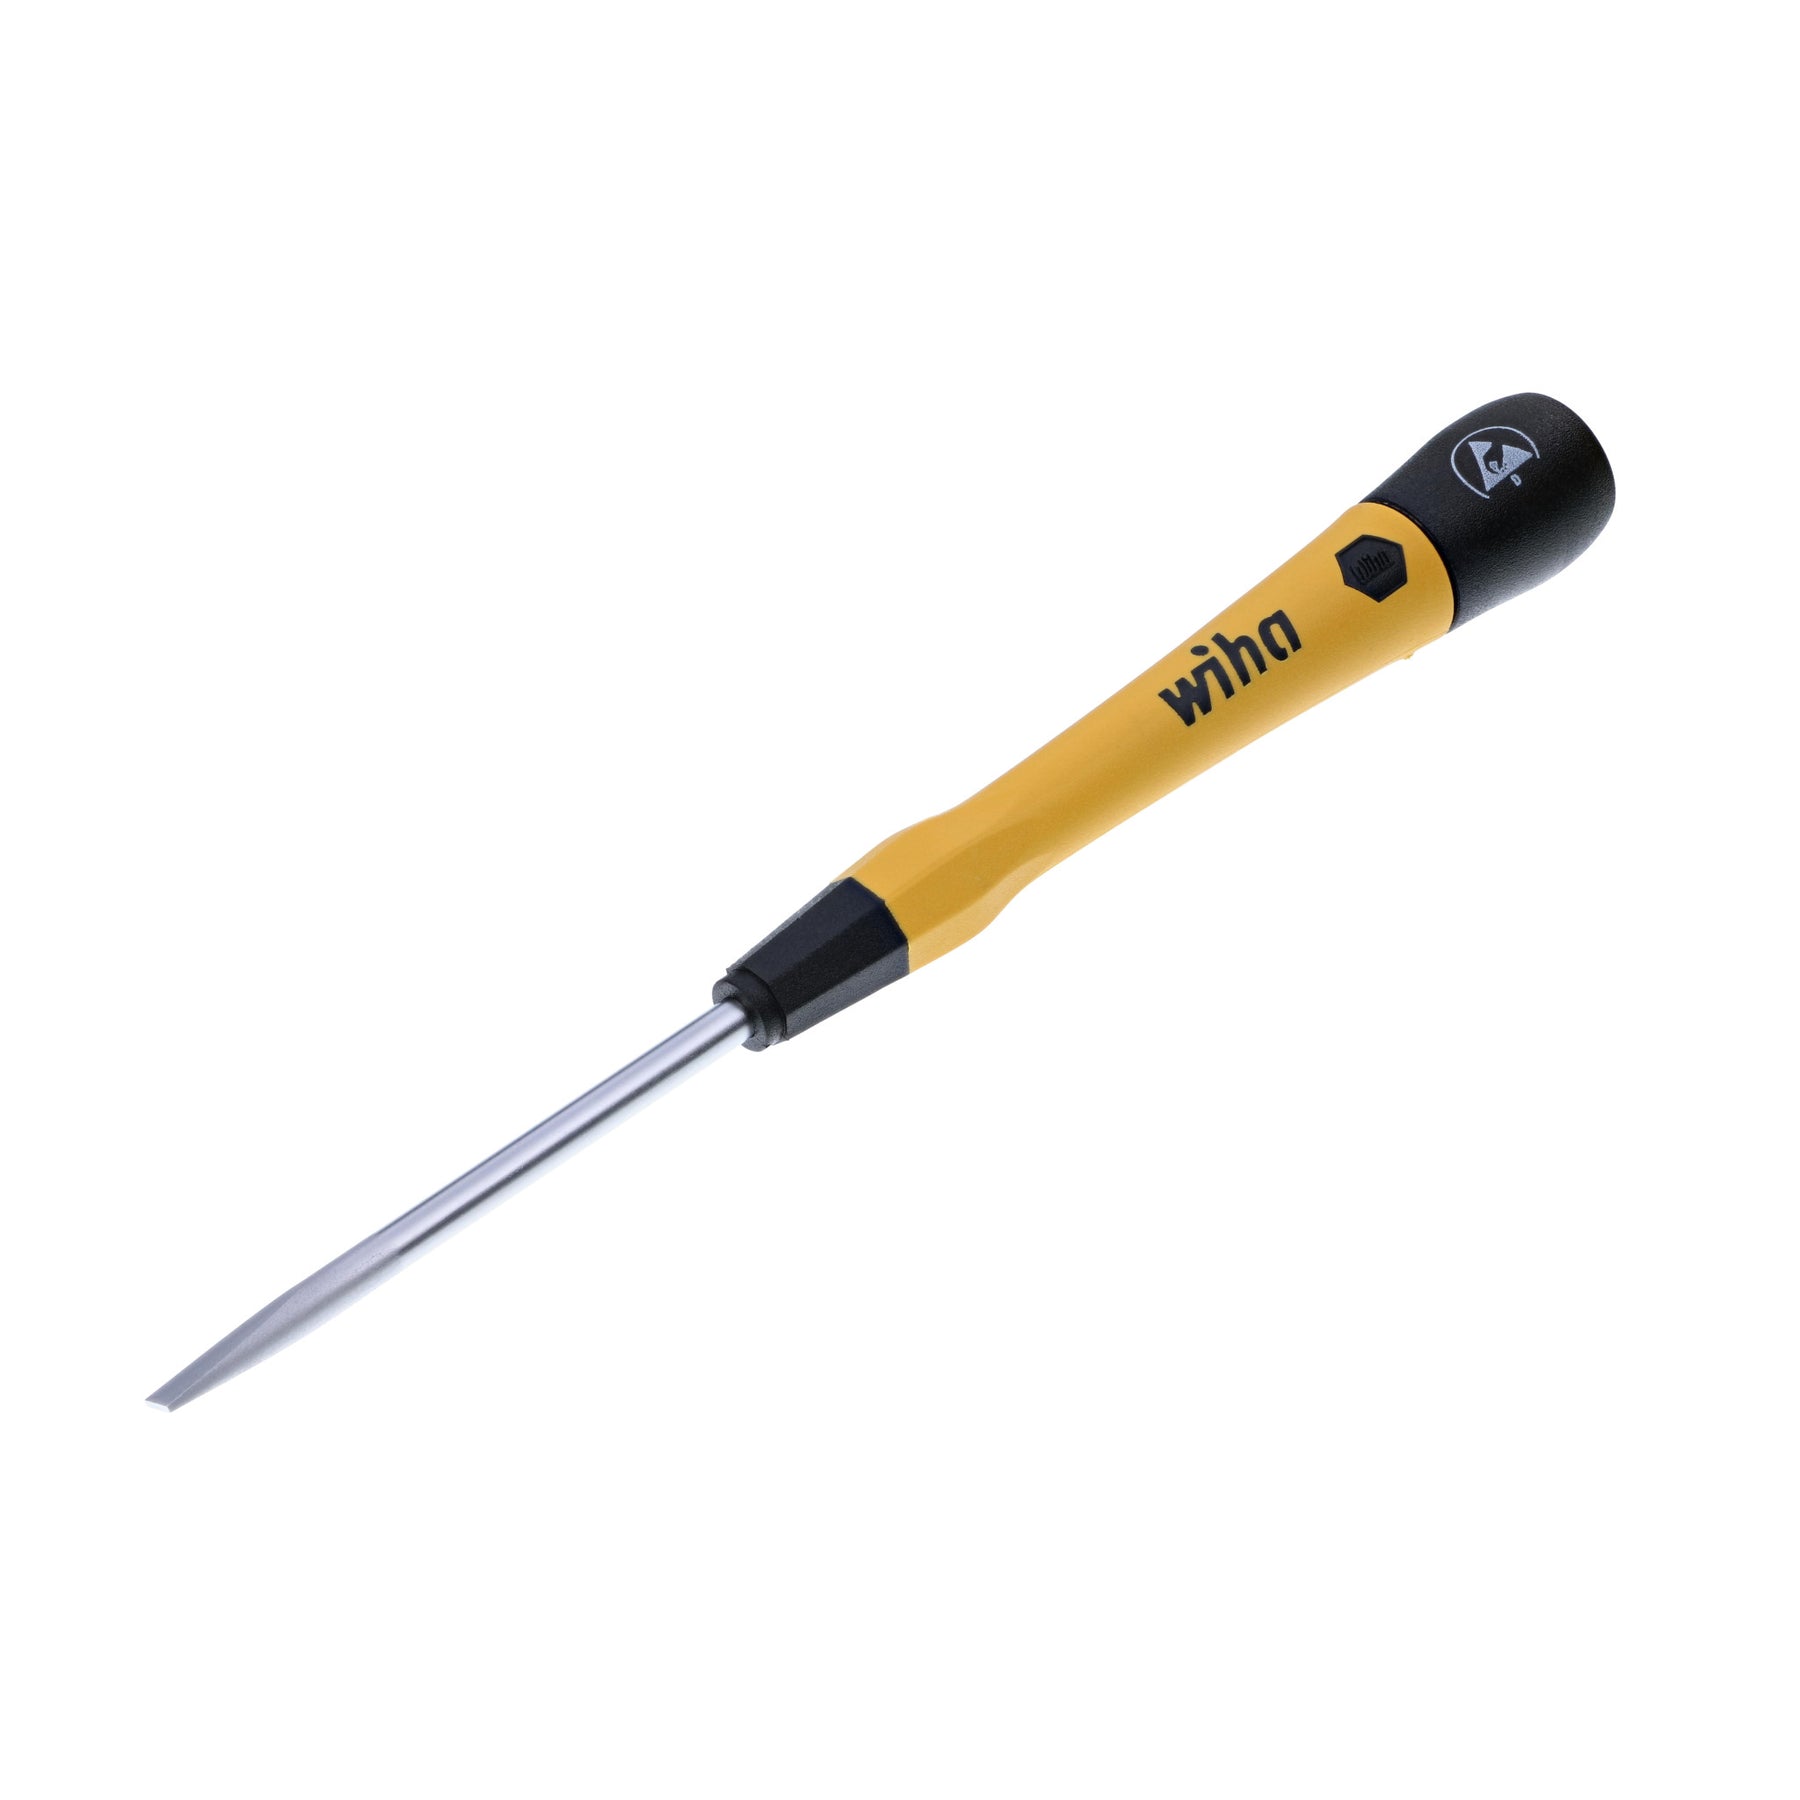 ESD Safe PicoFinish Precision Screwdriver - Slotted 4.0mm x 60mm